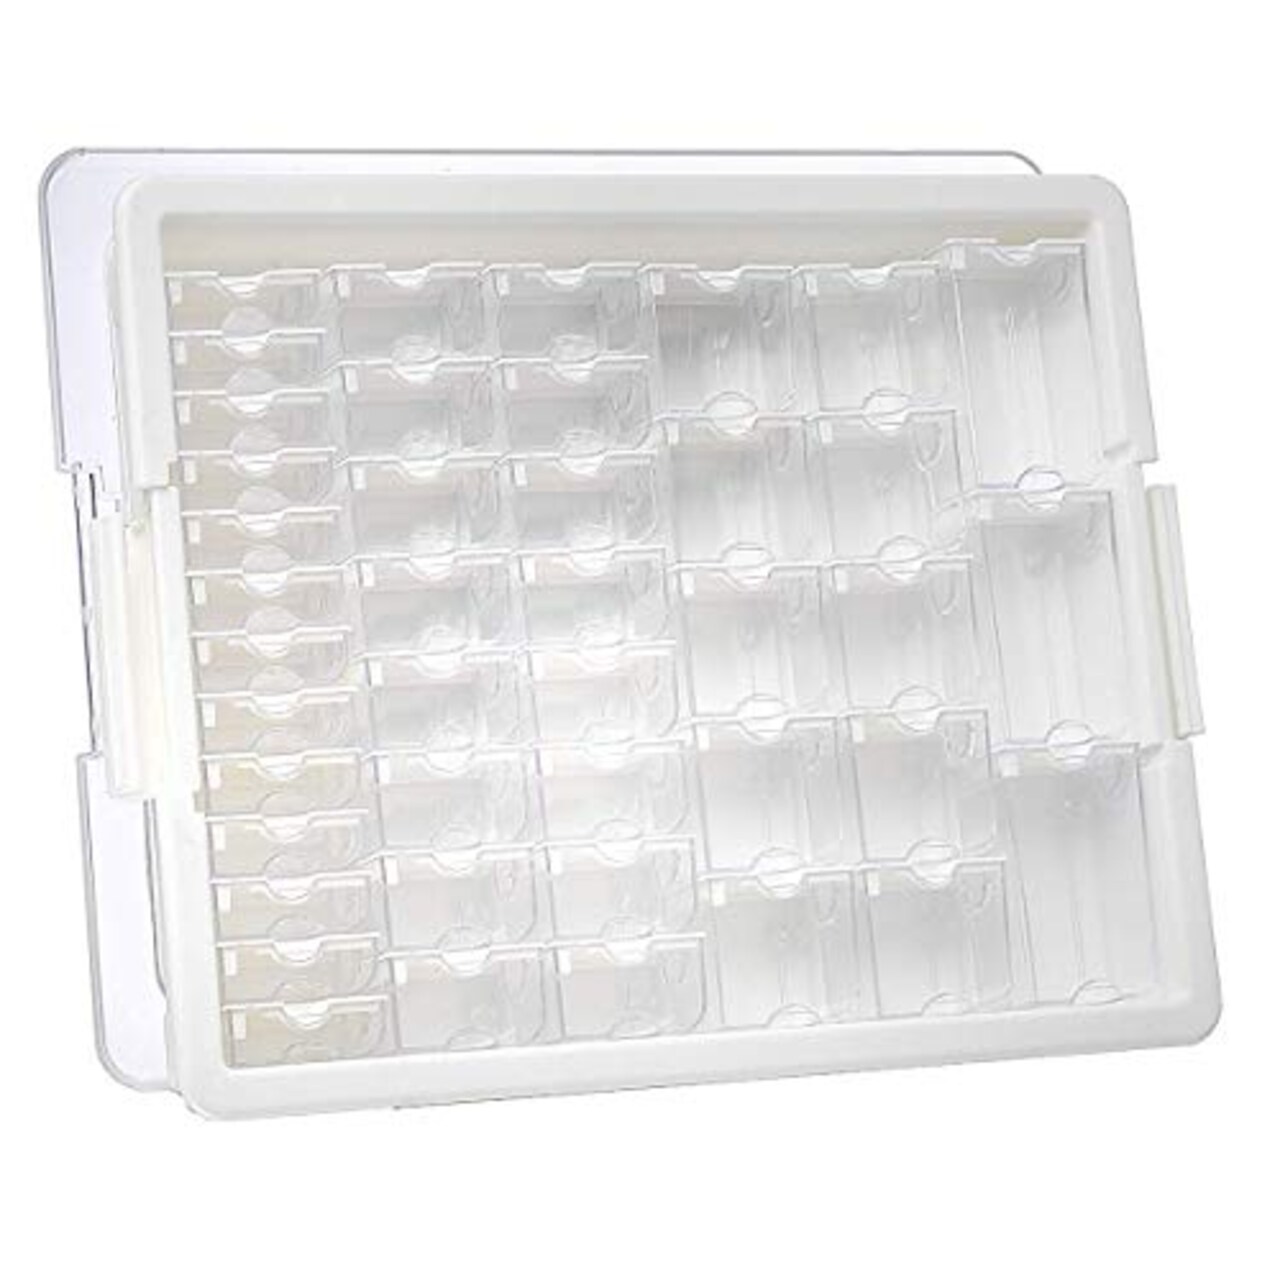 Elizabeth Ward Bead Storage Solutions: 45-Piece Assorted Storage Tray – Bead  Organizer with 42 Containers of Various Sizes, a Tray and Lid for Beads and  More